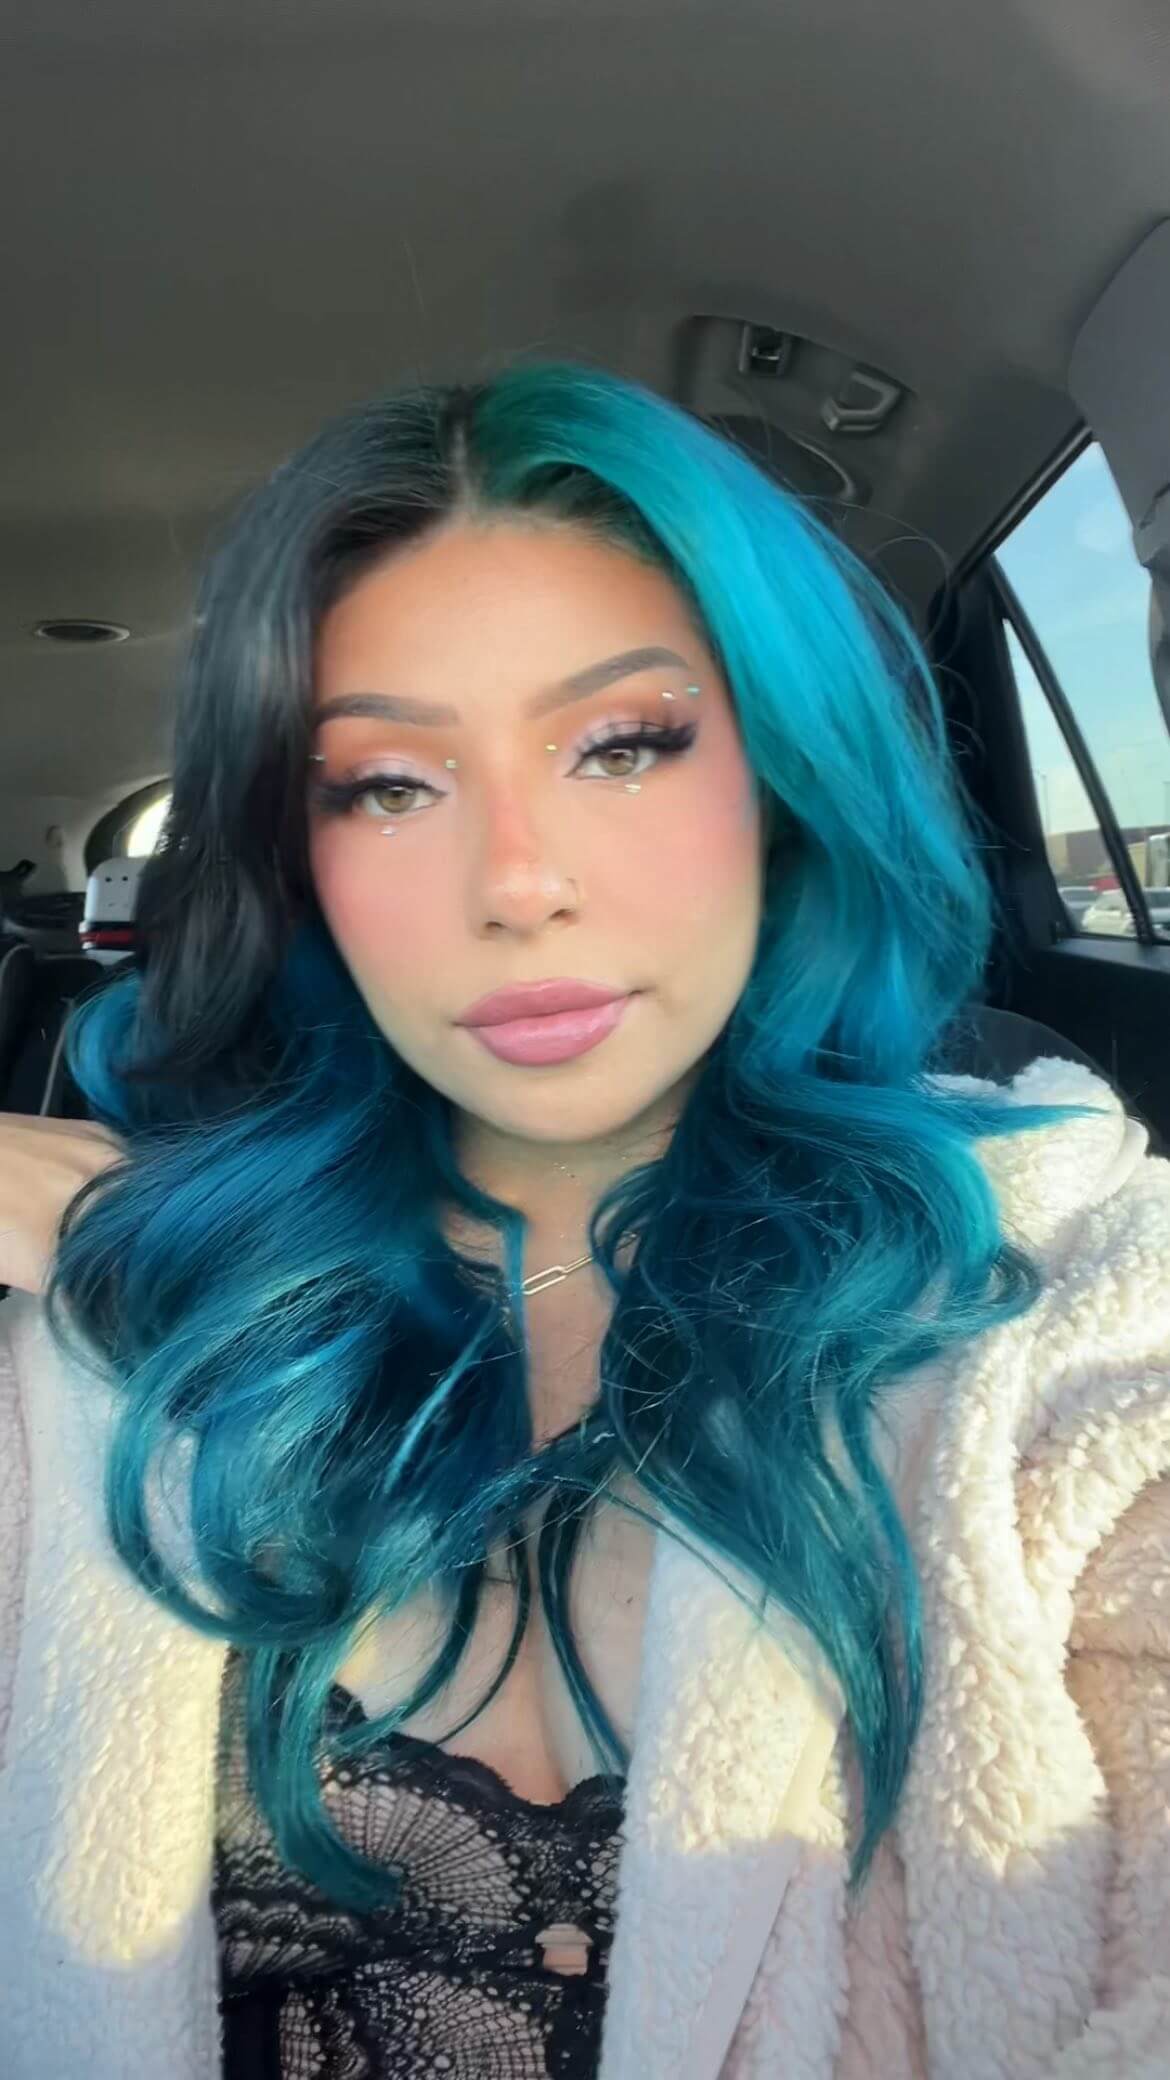 Mermaid vibe with long bright blue curls and volume